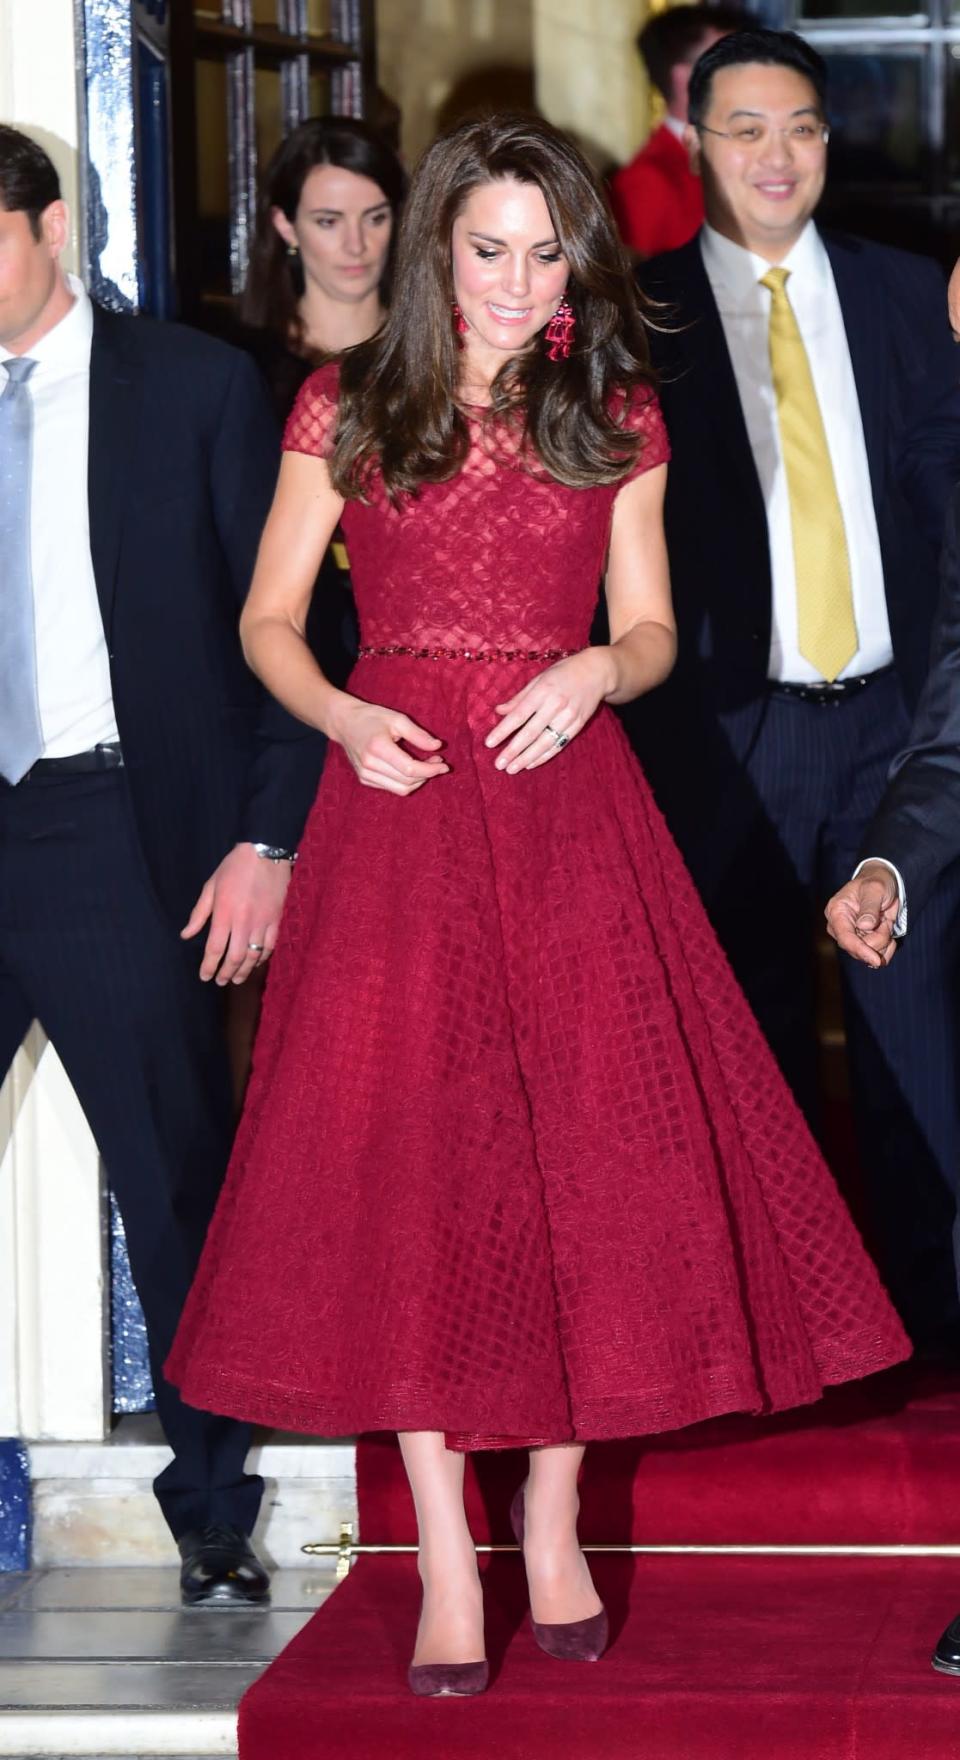 <p>Kate donned the colour of the season for the opening night of West End musical, <i>42nd Street</i>. Wearing a claret midi-length dress by Marchesa Notte (that cost £1,105), the Duchess opted for some seriously fashion-forward accessories including a pair of pom pom statement earrings from Kate Spade. Gianvito Rossi pumps and a matching Mulberry clutch topped off the look.<br><i>[Photo: PA]</i> </p>